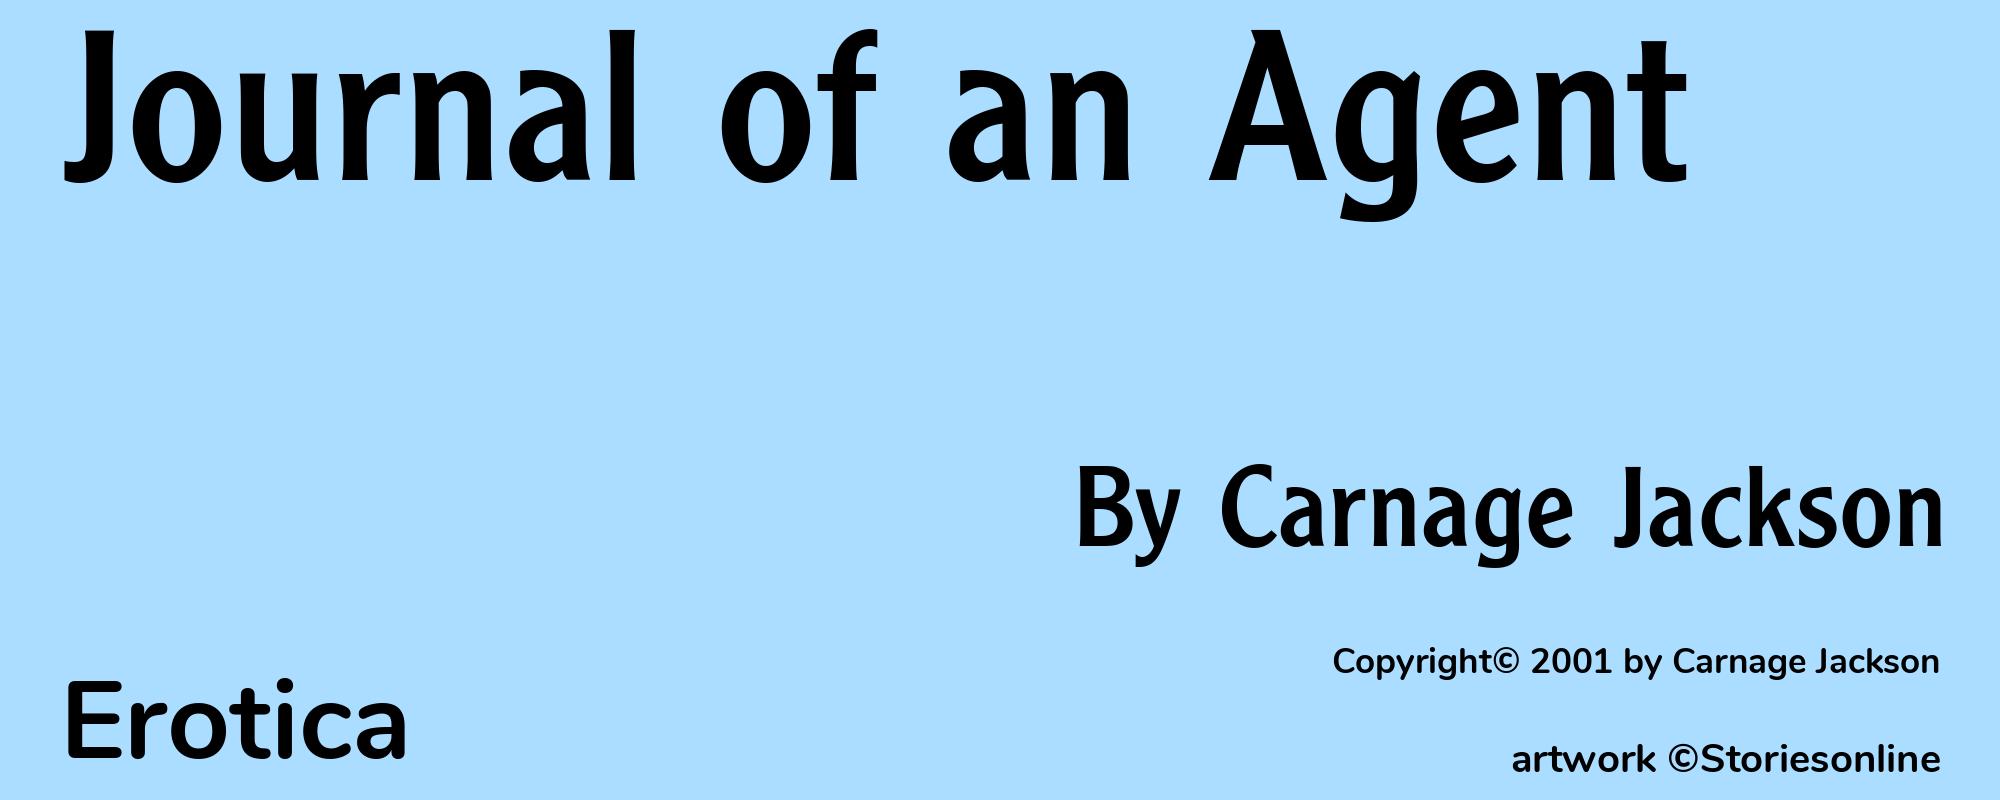 Journal of an Agent - Cover